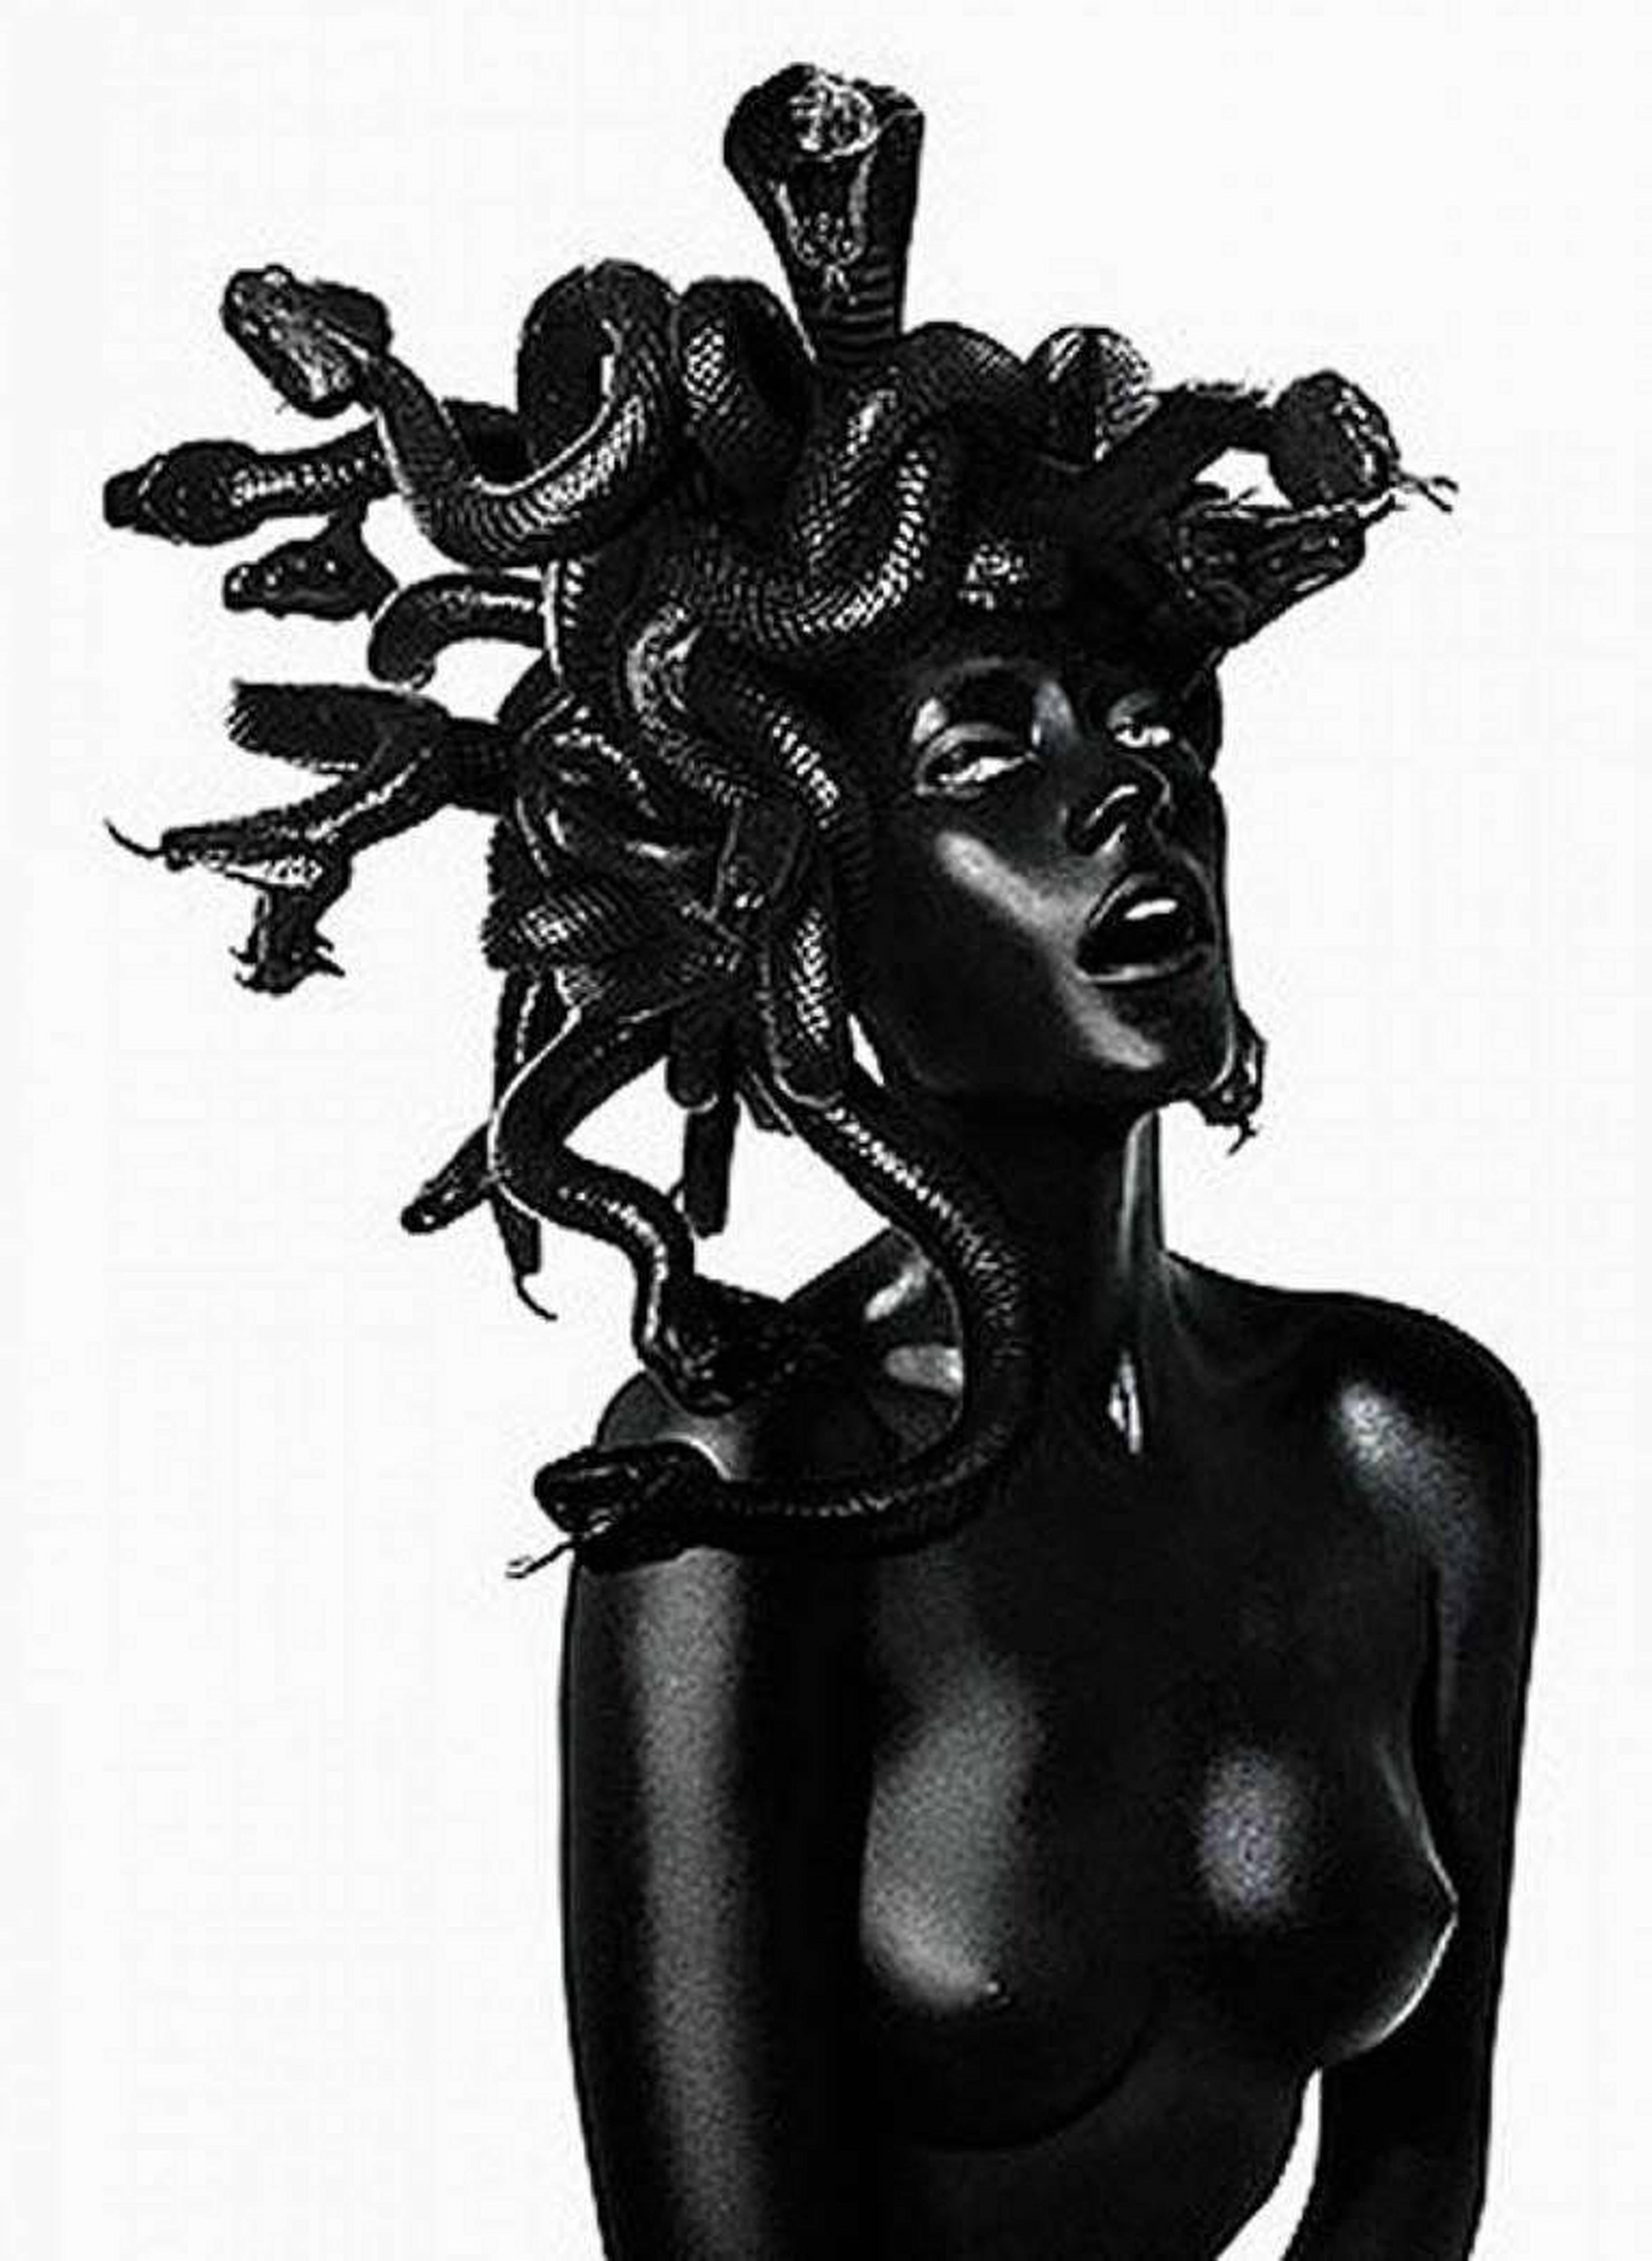 Rankin and Damien Hirst Color Photograph -  Dani Smith as Medusa - Portrait with snake hair, fine art photography, 2011